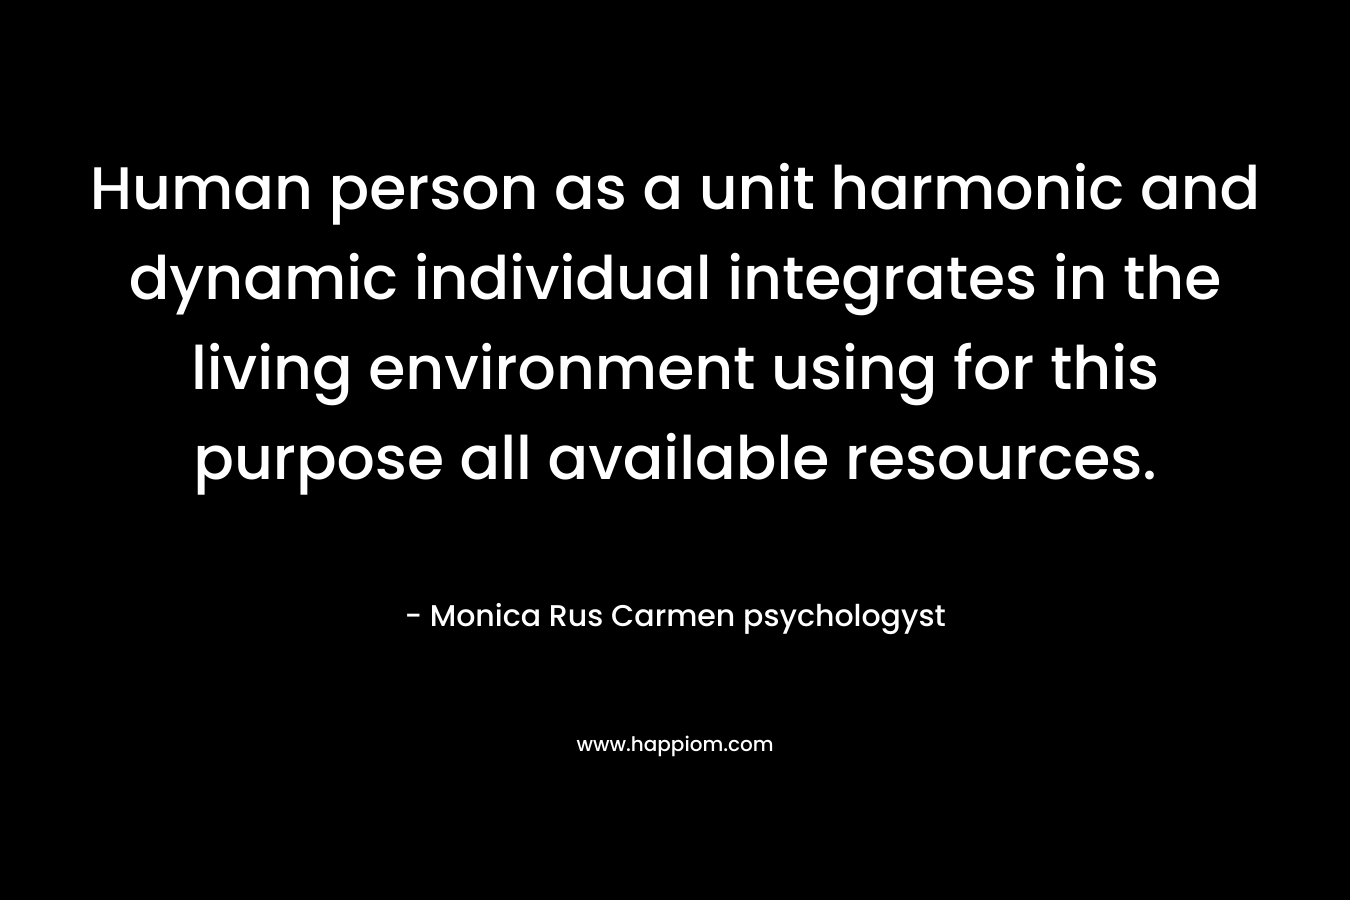 Human person as a unit harmonic and dynamic individual integrates in the living environment using for this purpose all available resources. – Monica Rus Carmen psychologyst